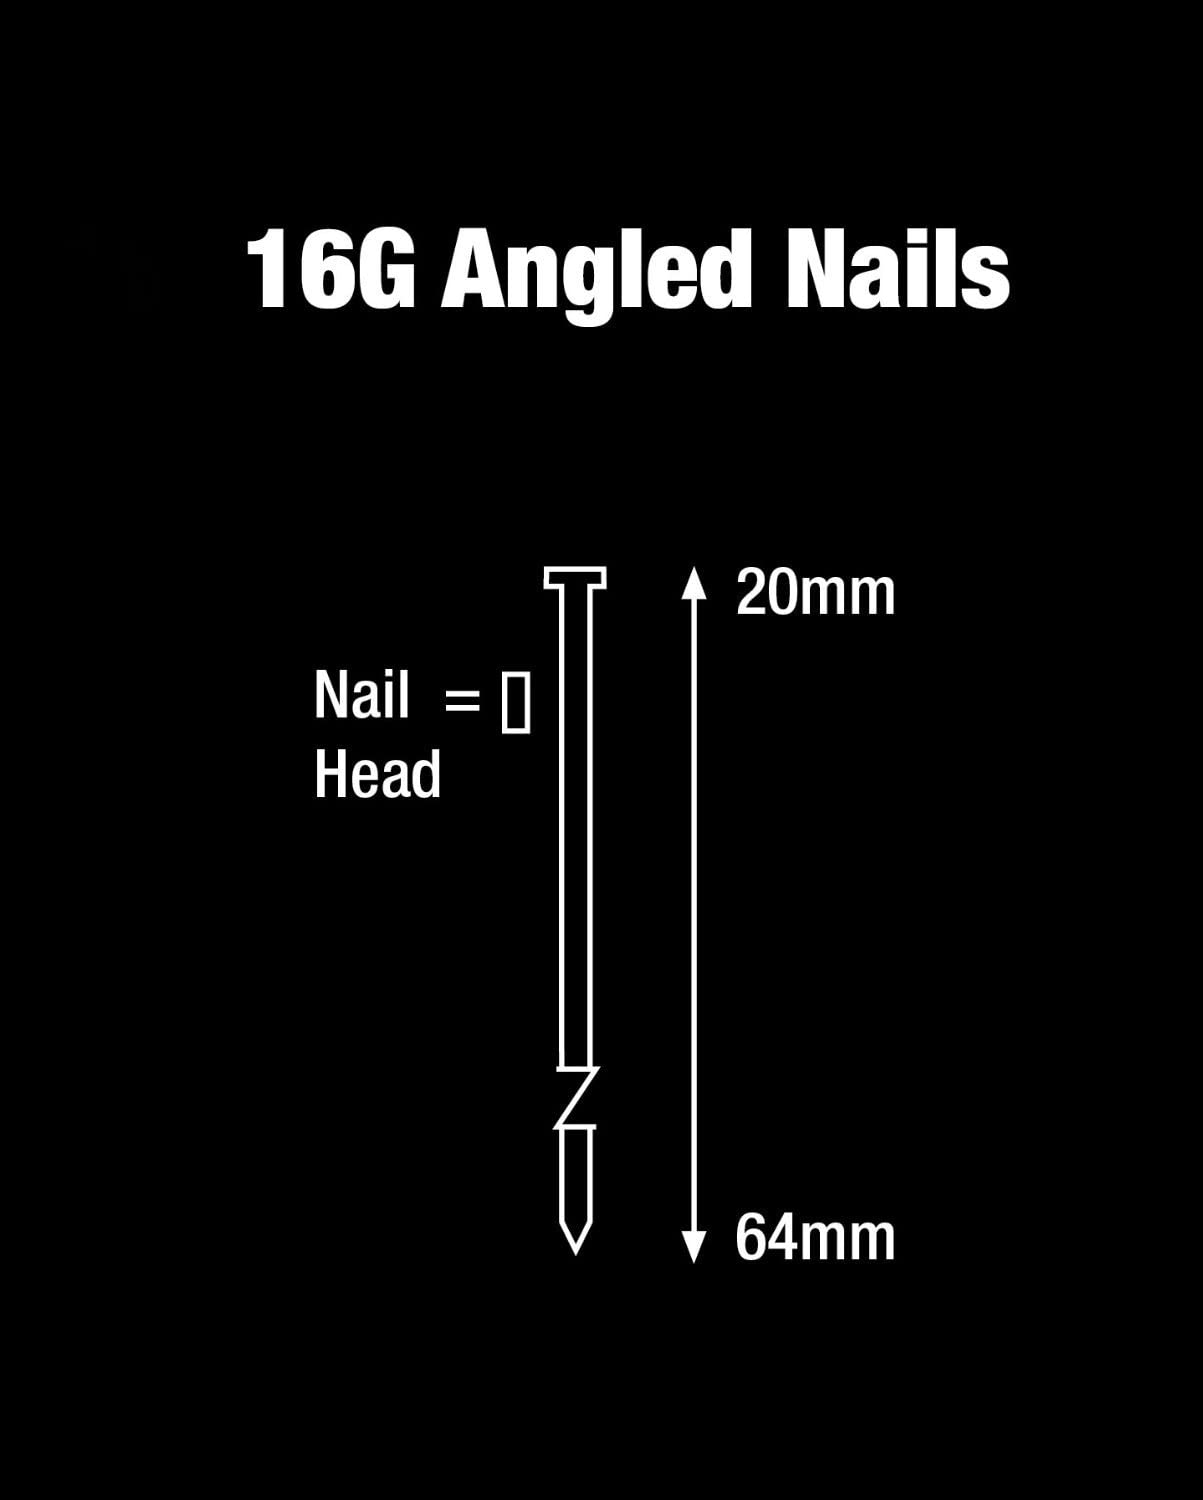 Tacwise 16G/50mm Finish Nails, 0298, 16G Finish Nails, Pack of 2500, Galvanised